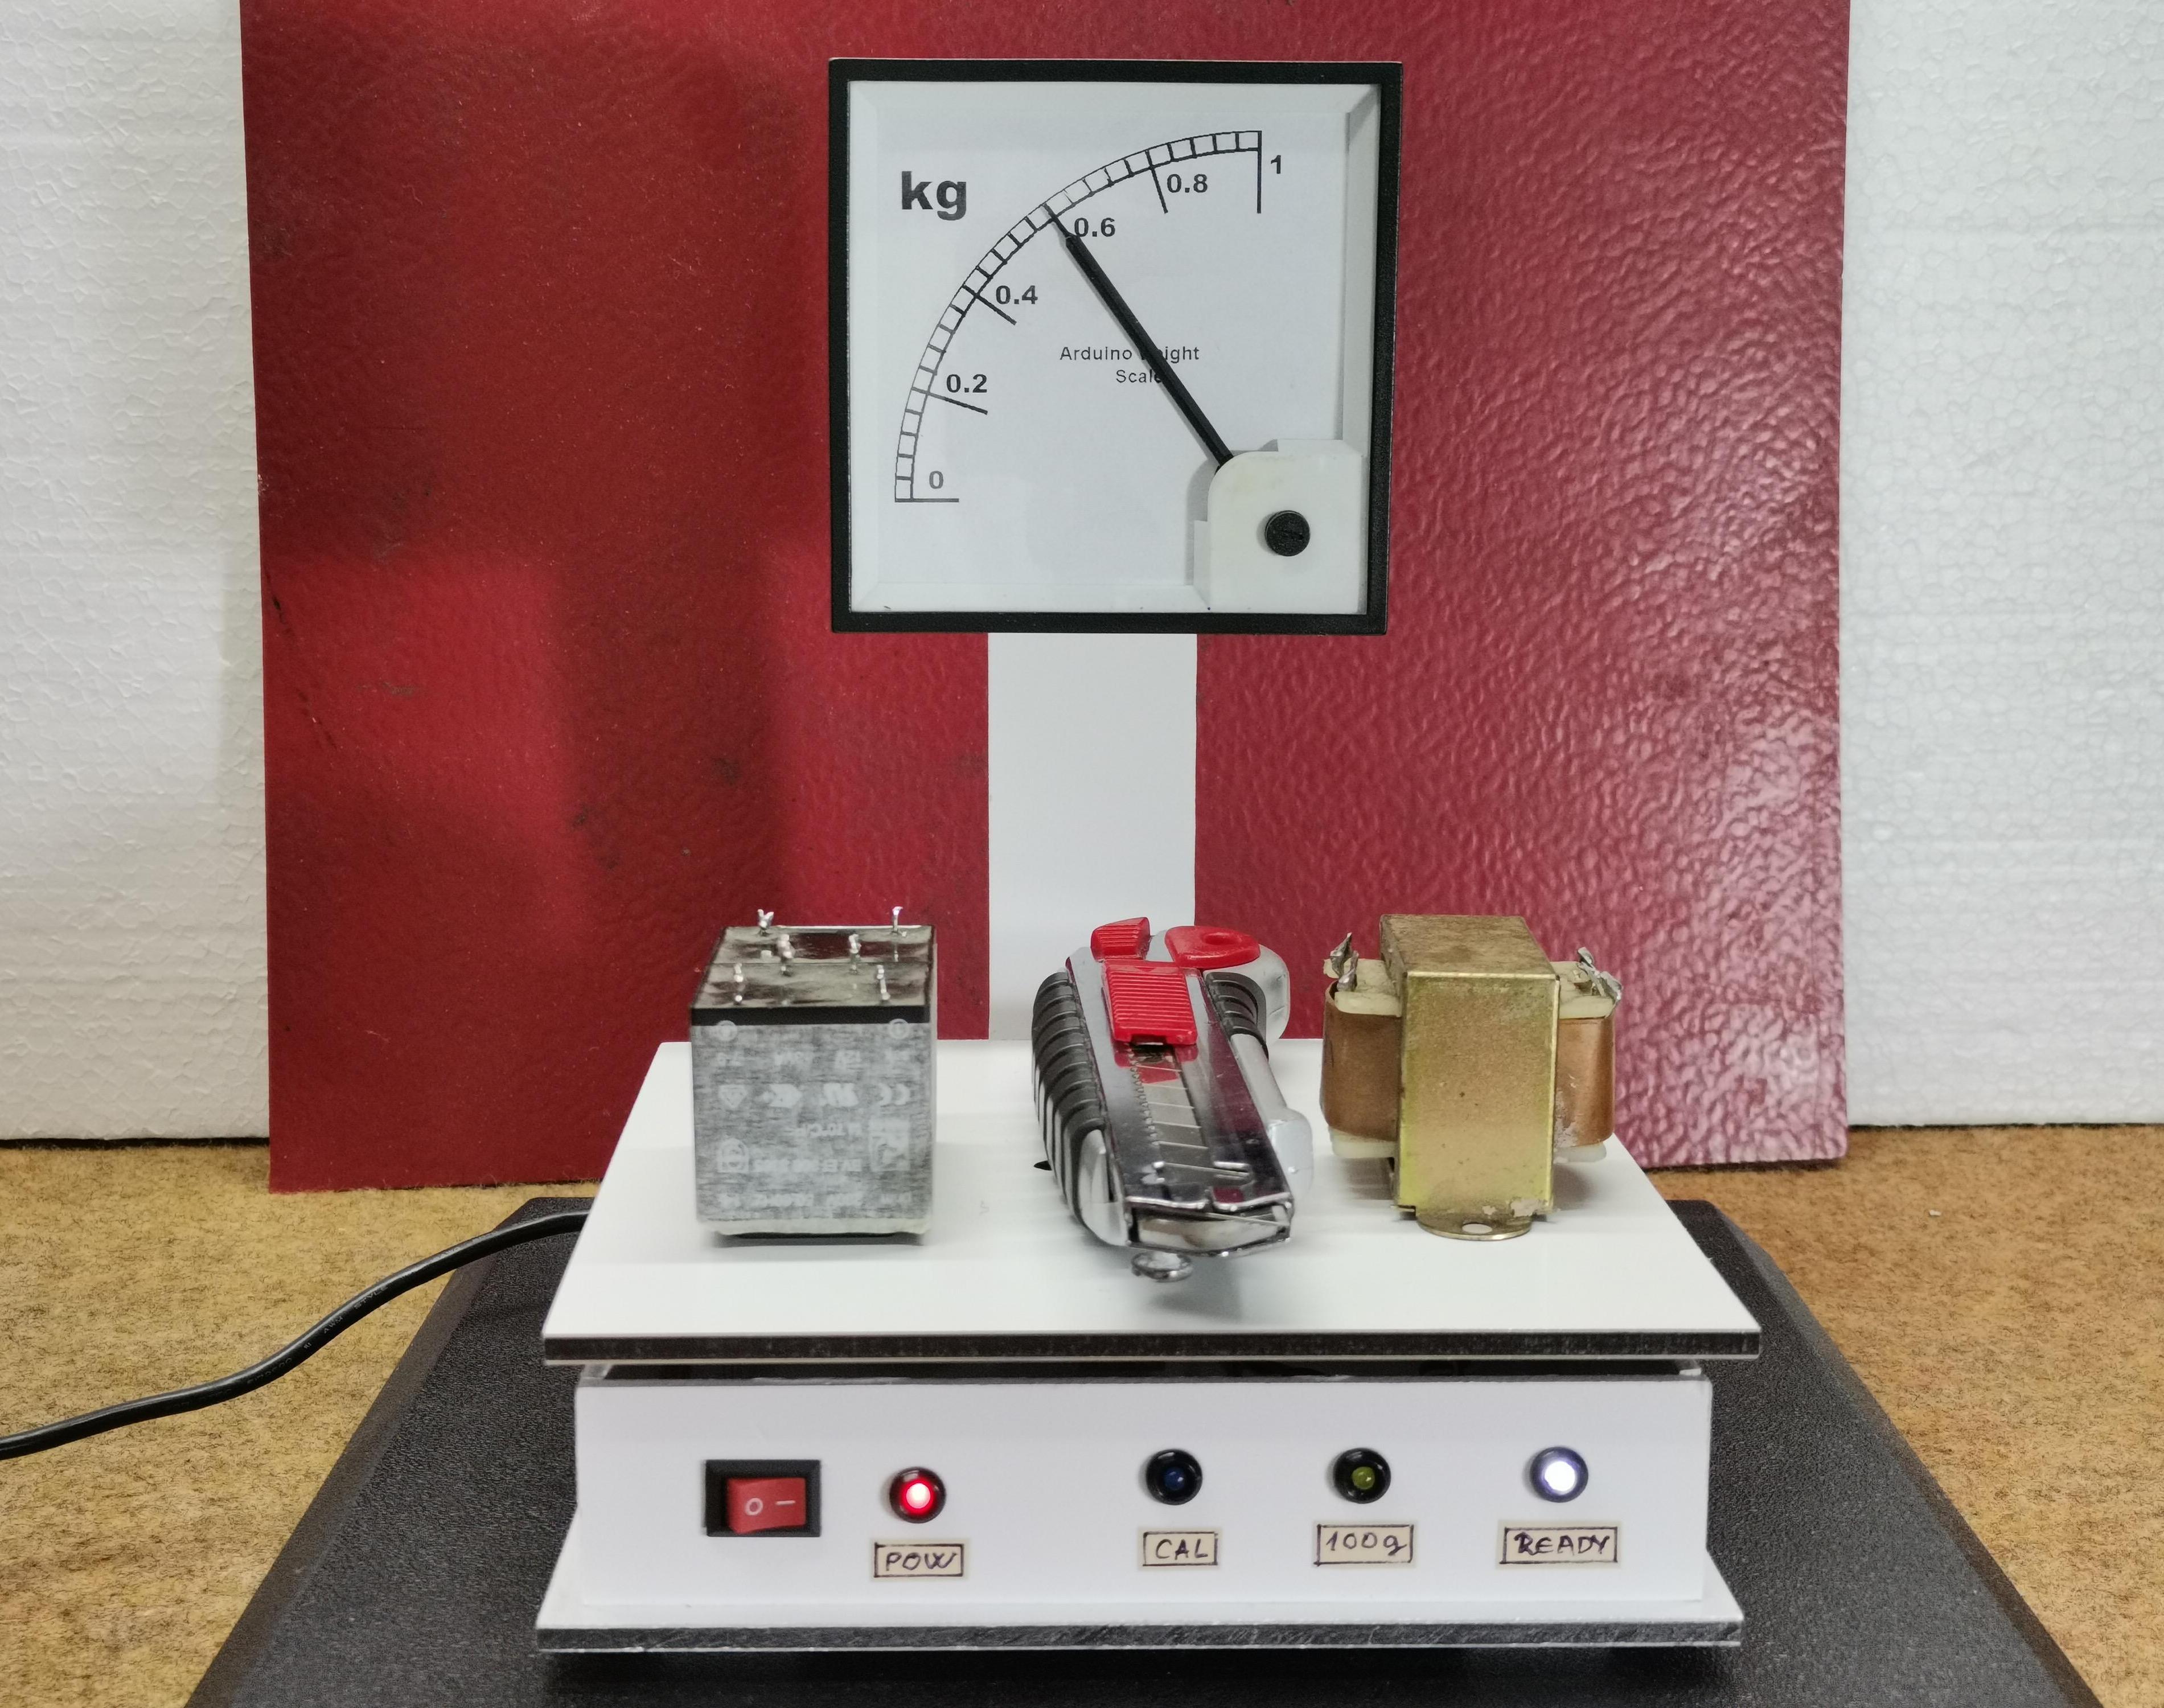 Arduino Weighing Machine (scale) With Analog Showing